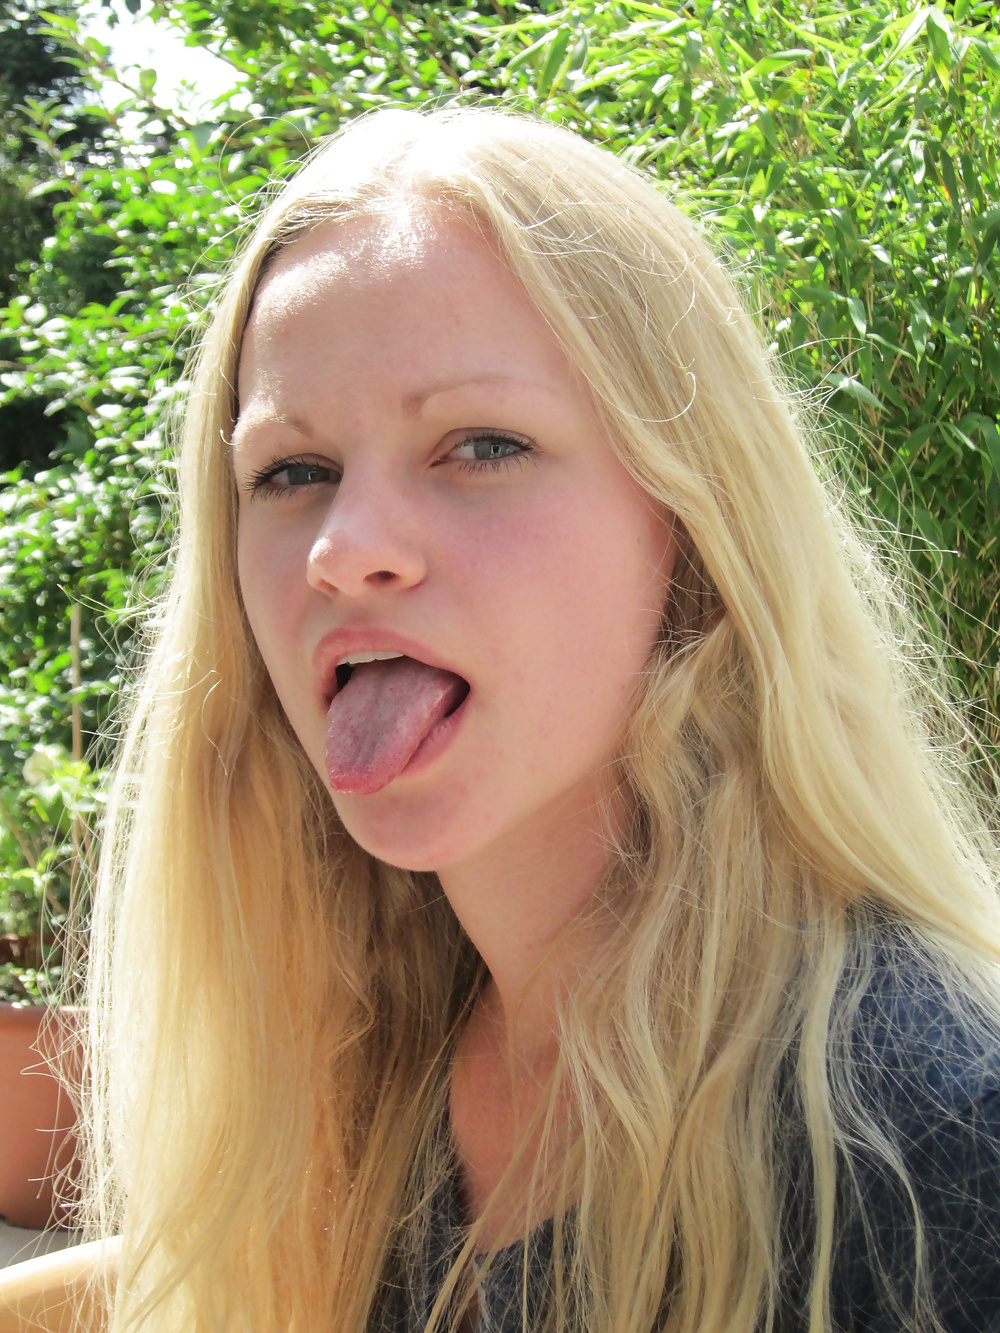 XXX Teen Girls - tongue out and mouth open - Part 1